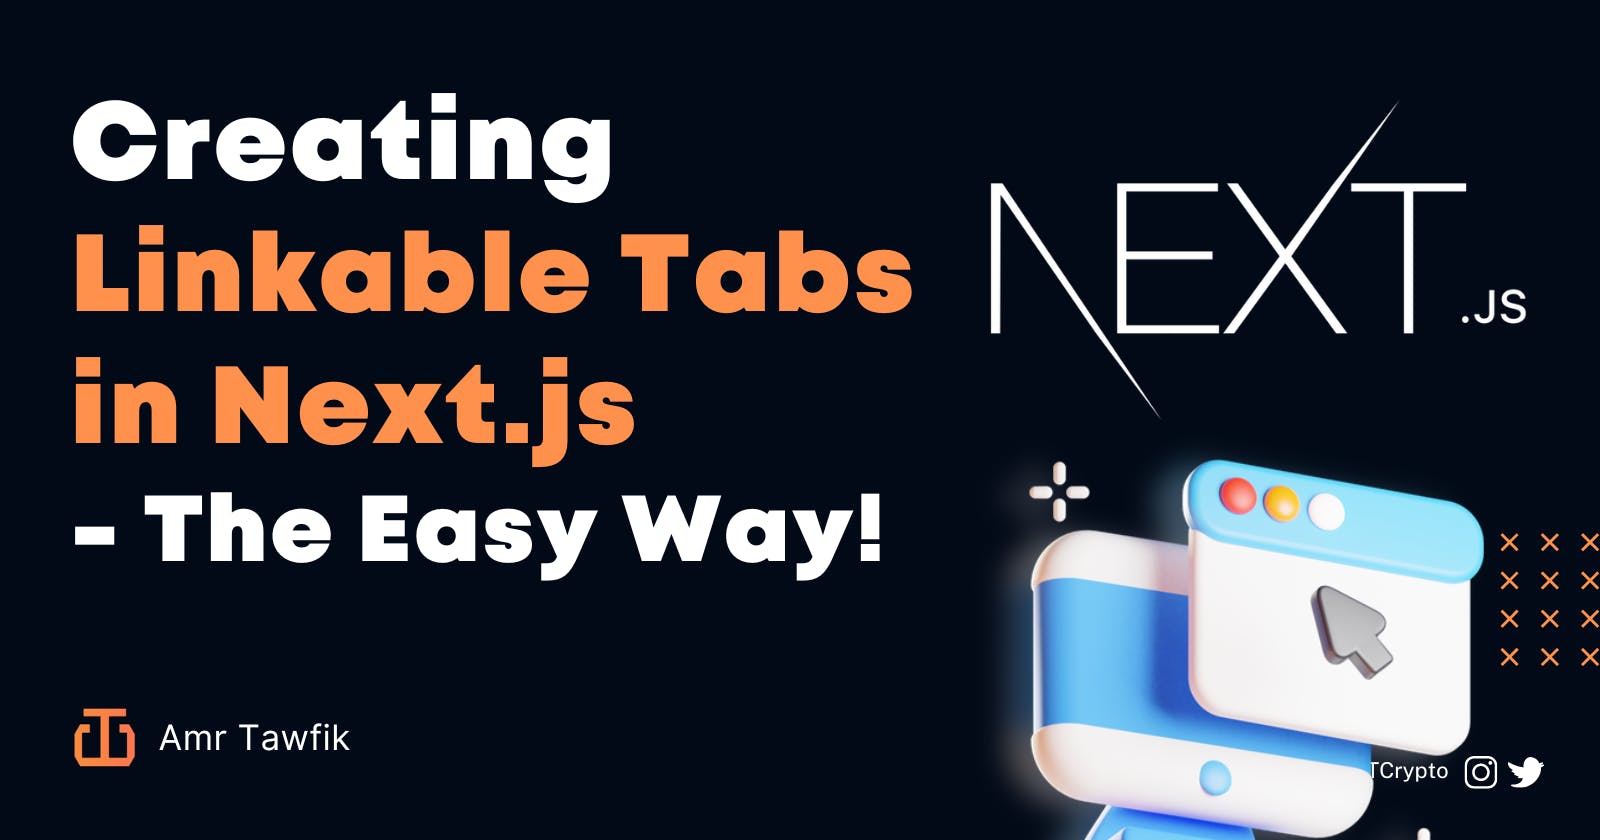 Creating Linkable Tabs in Next.js - The Easy Way!